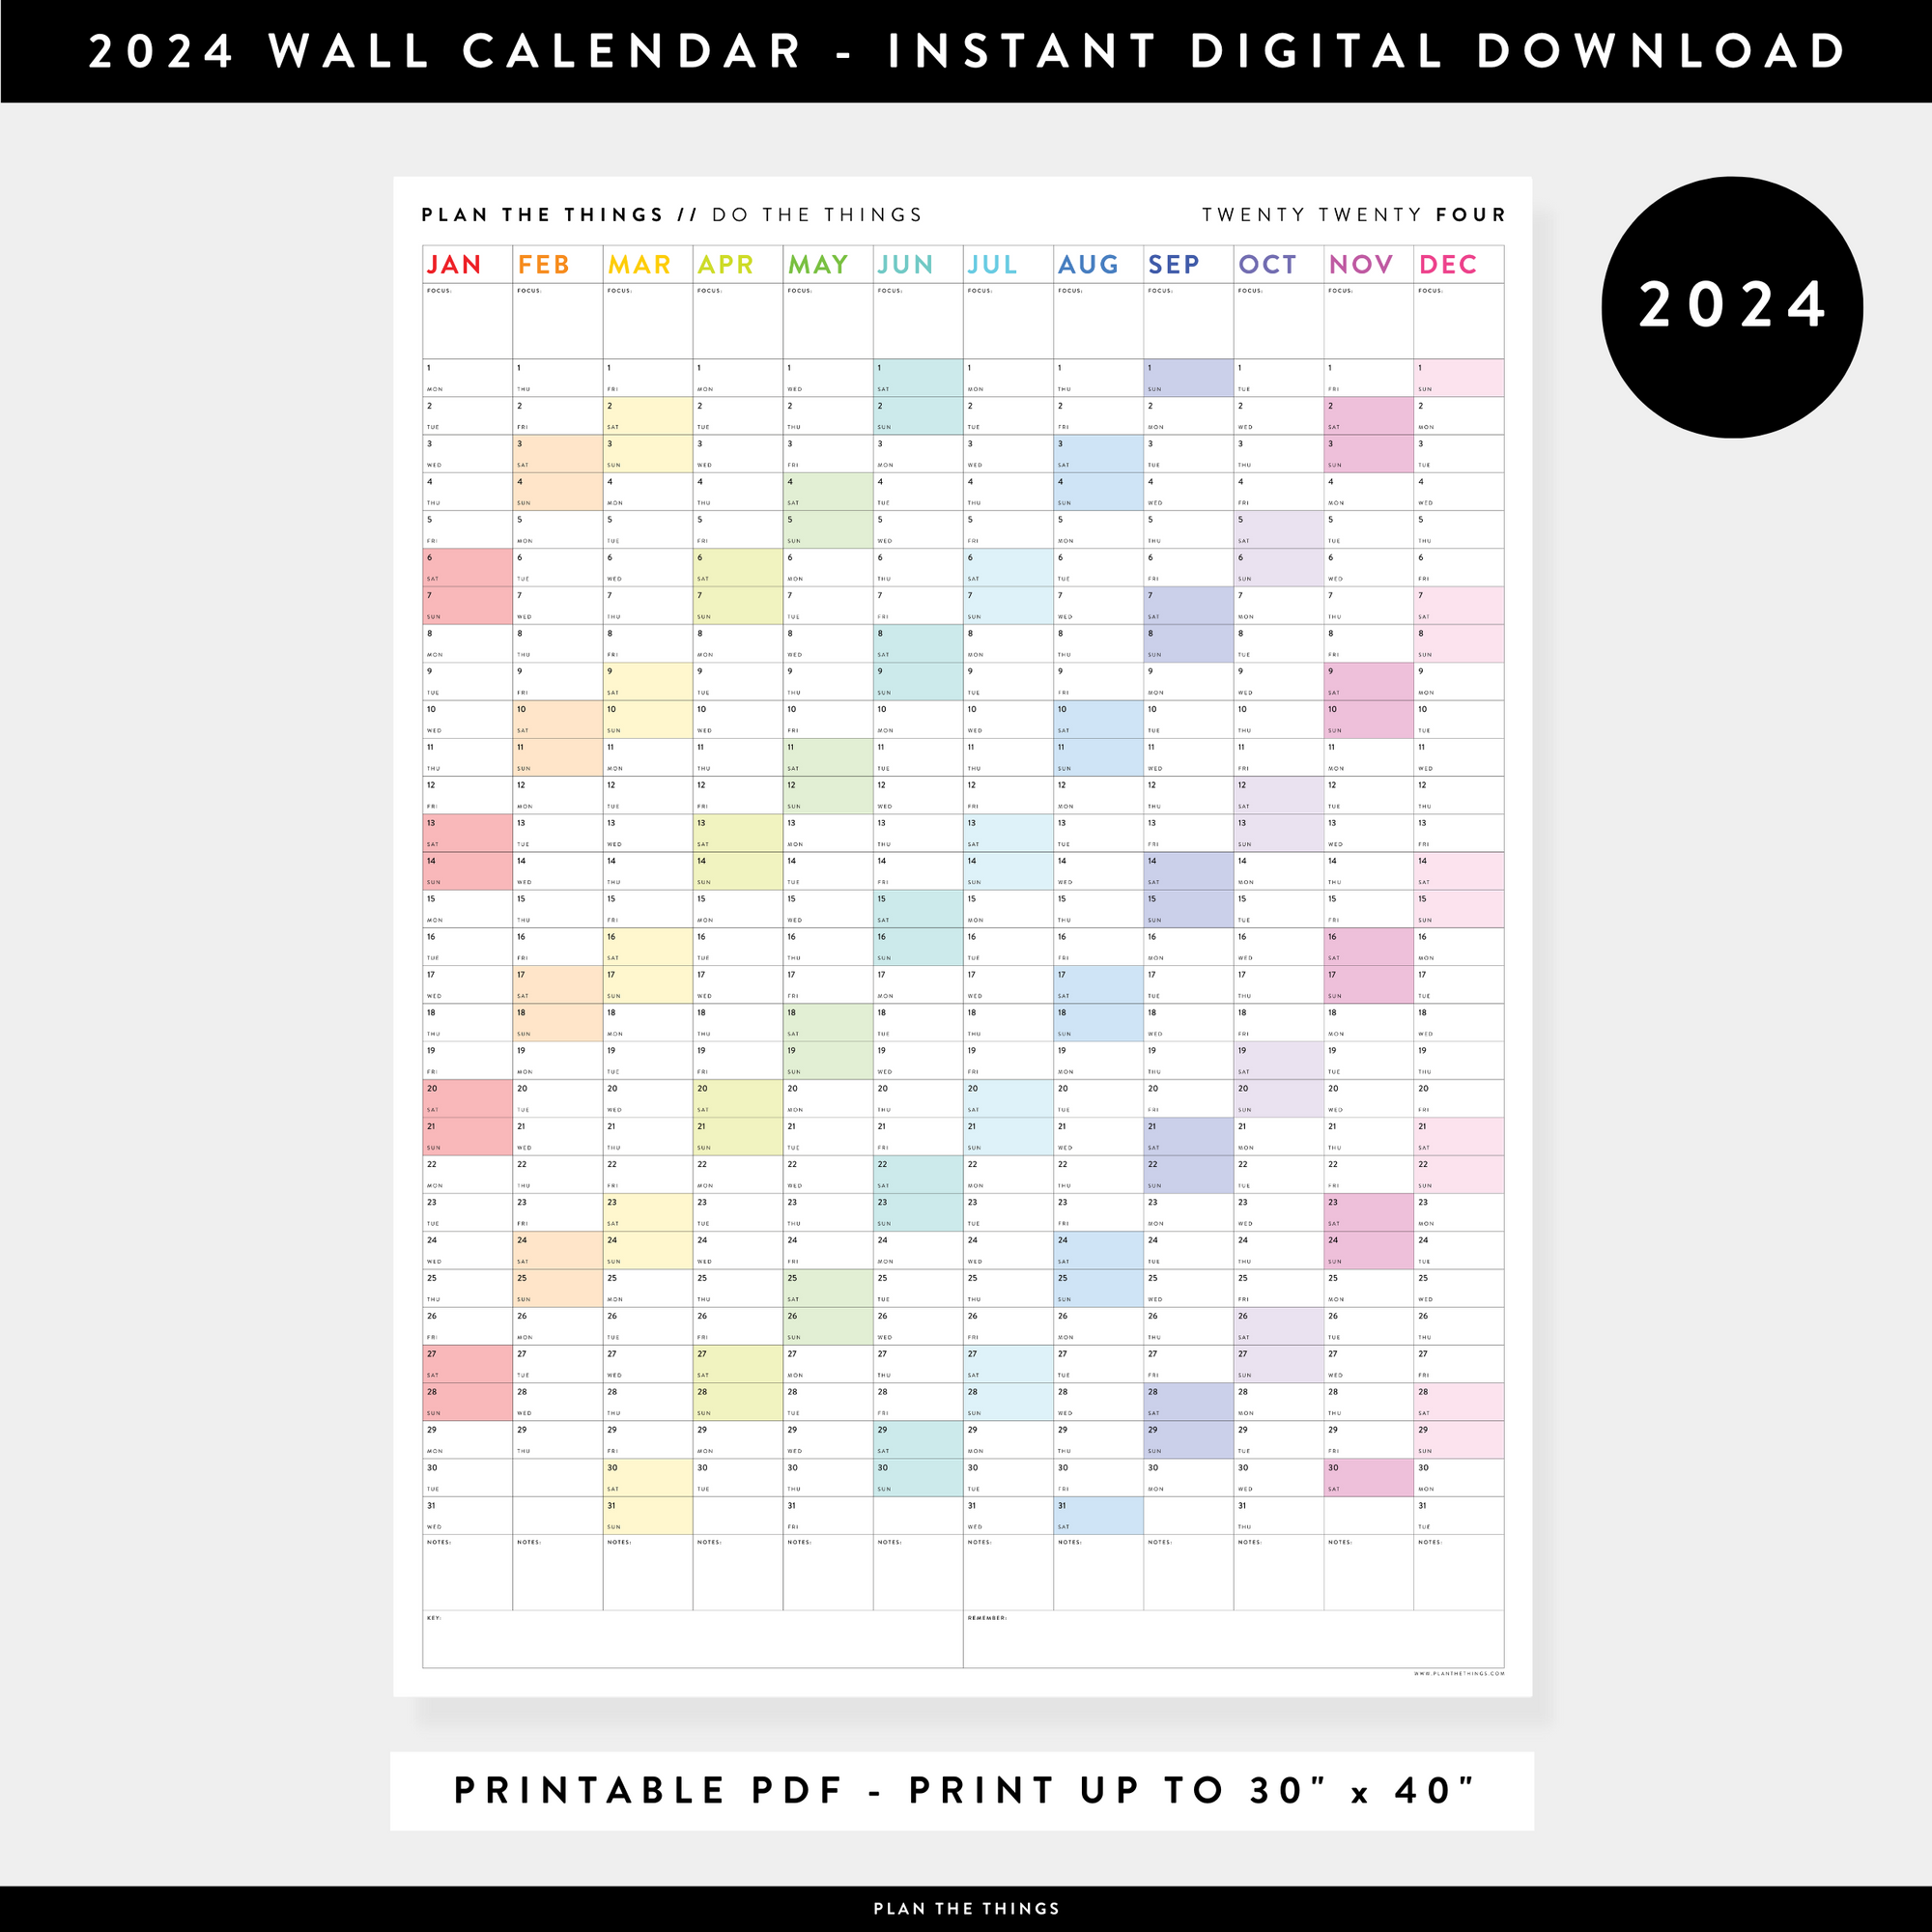 PRINTABLE VERTICAL 2024 WALL CALENDAR WITH RAINBOW WEEKENDS - INSTANT DOWNLOAD